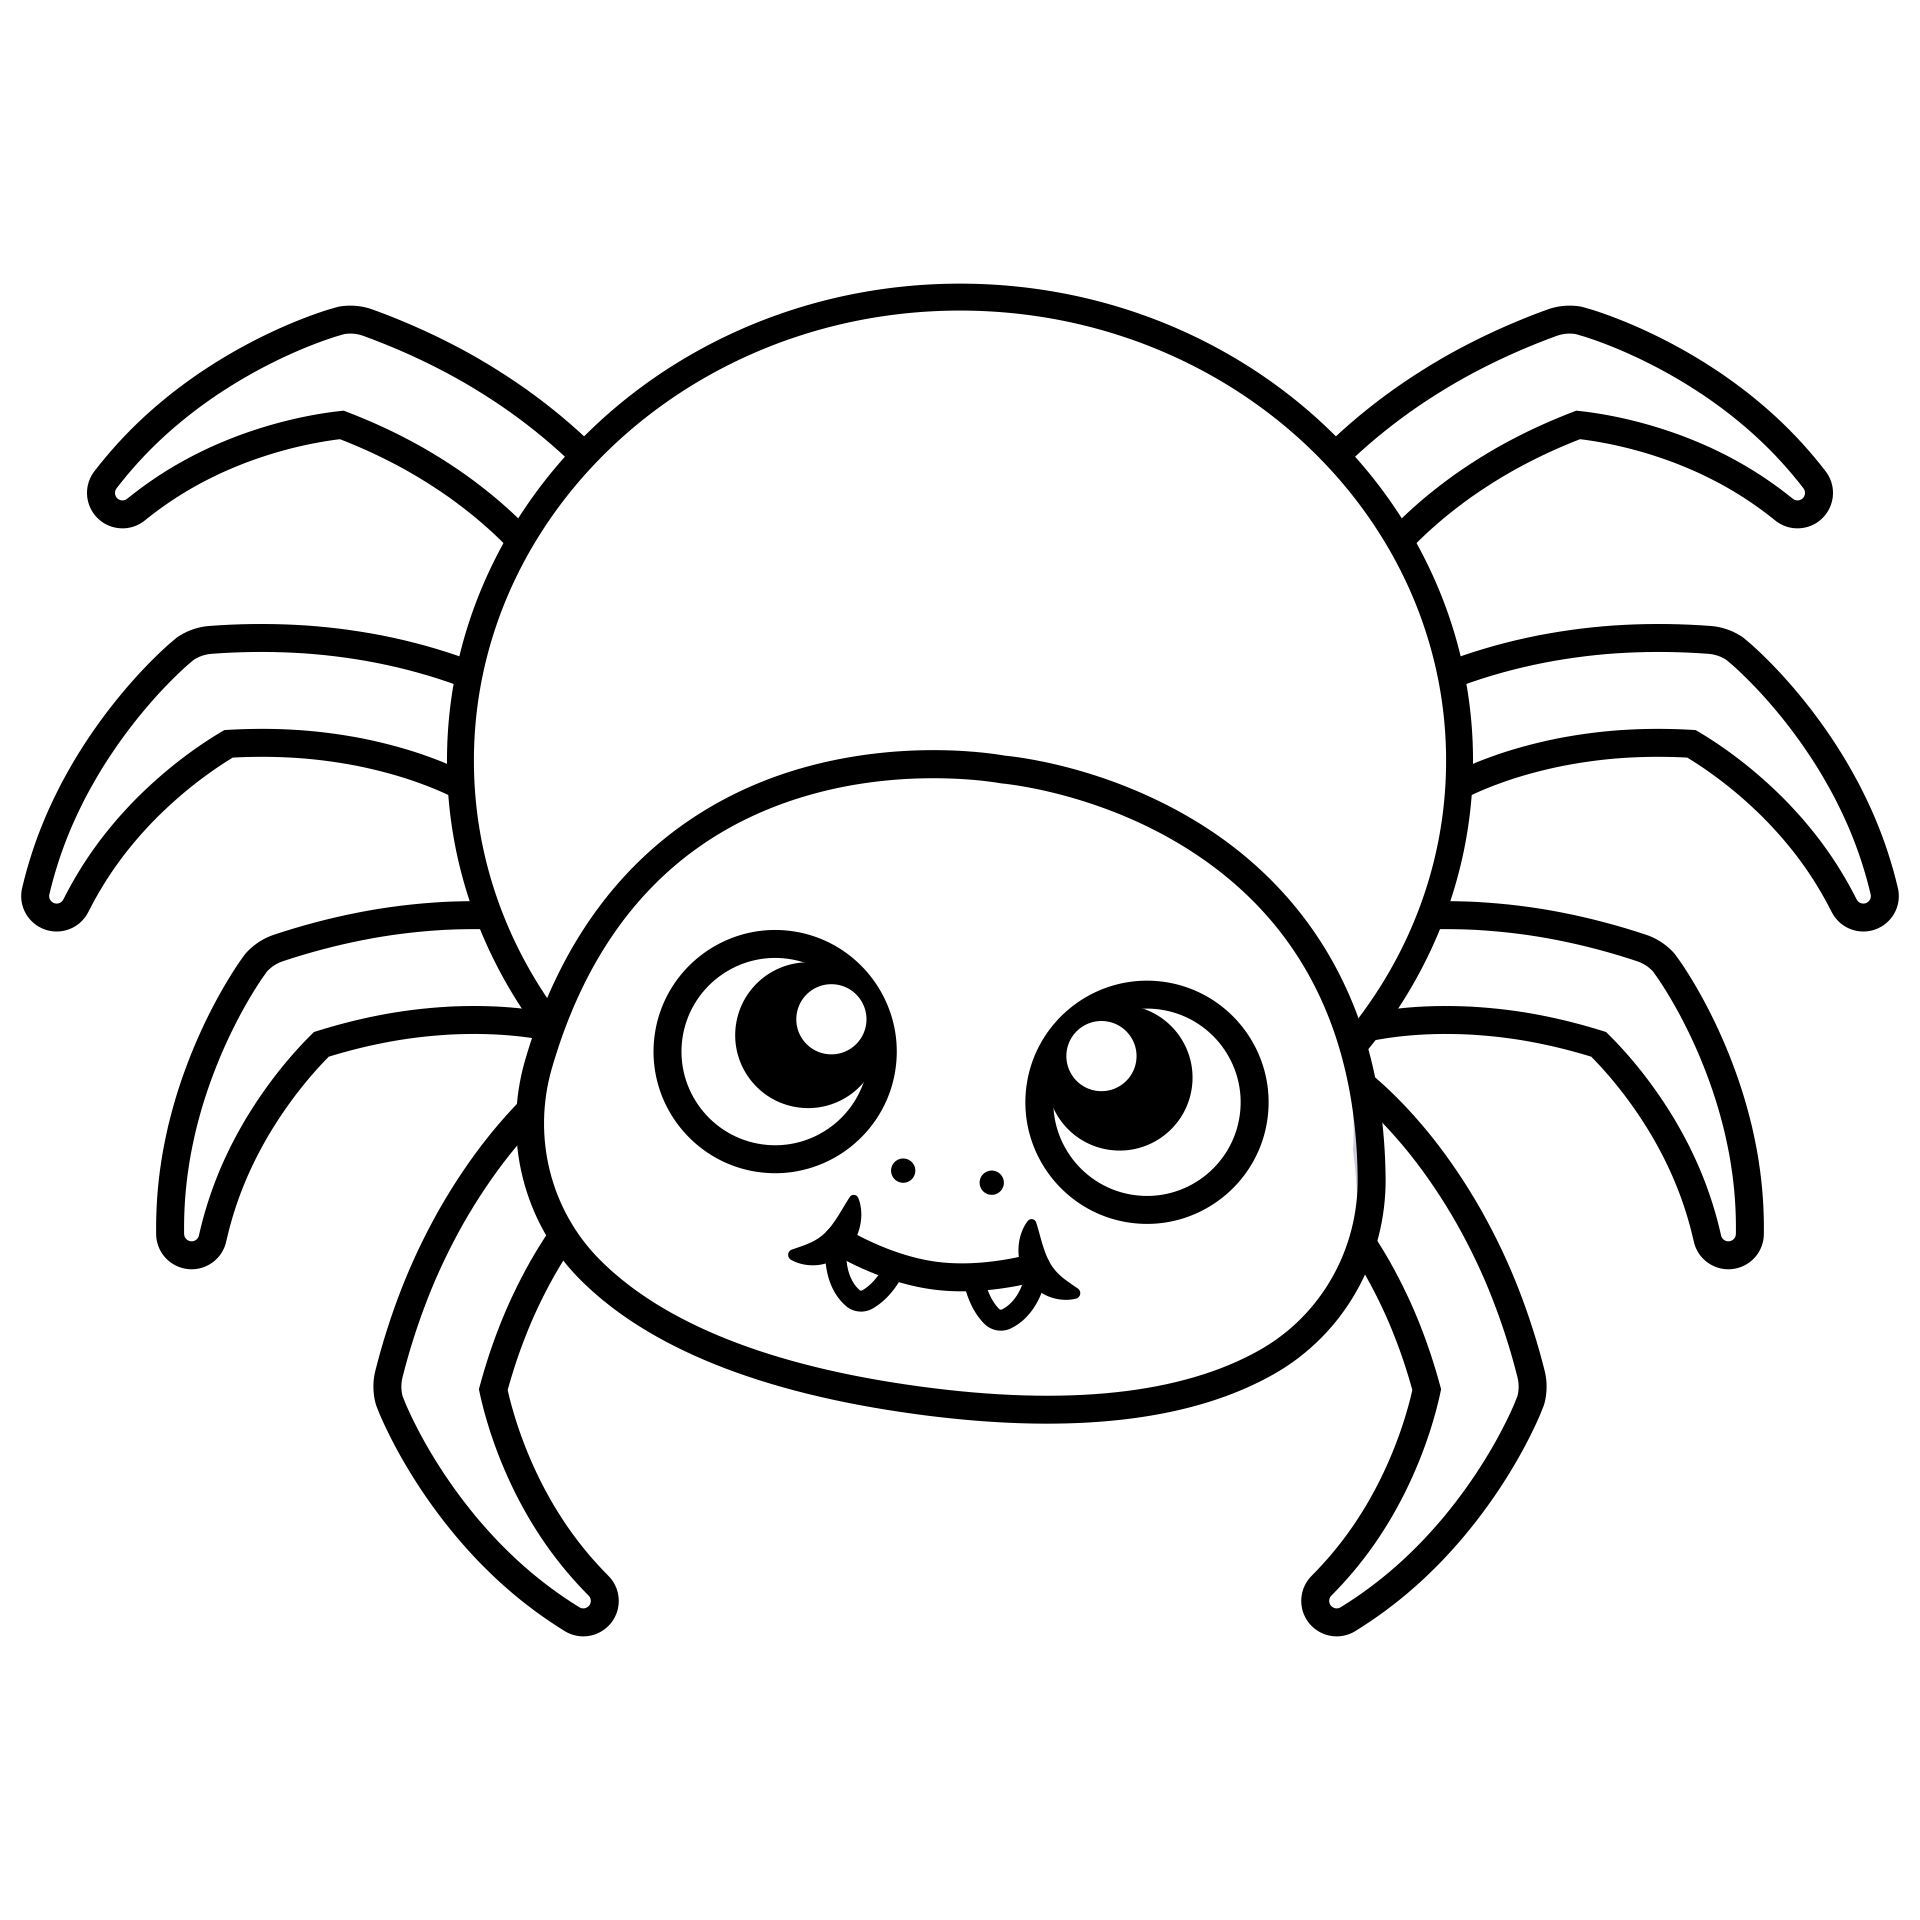 Printable spider coloring pages spider coloring page halloween coloring halloween coloring pages